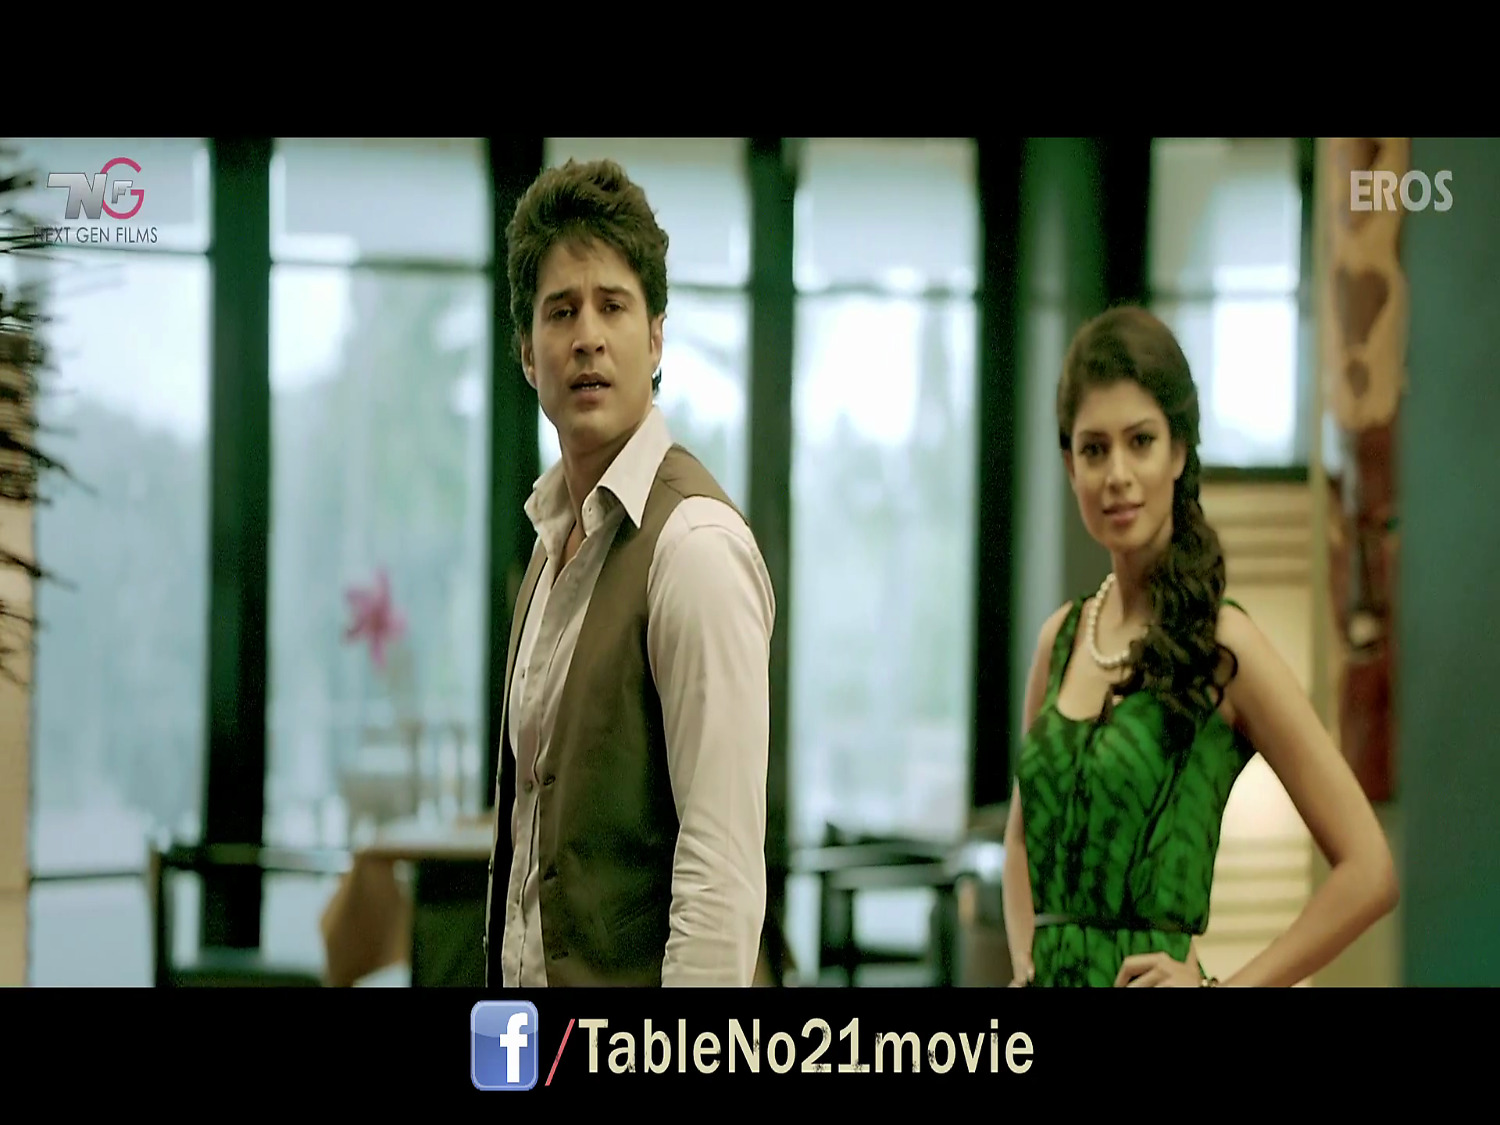 Table No 21 Hd Full Movie Download 1080p Hd